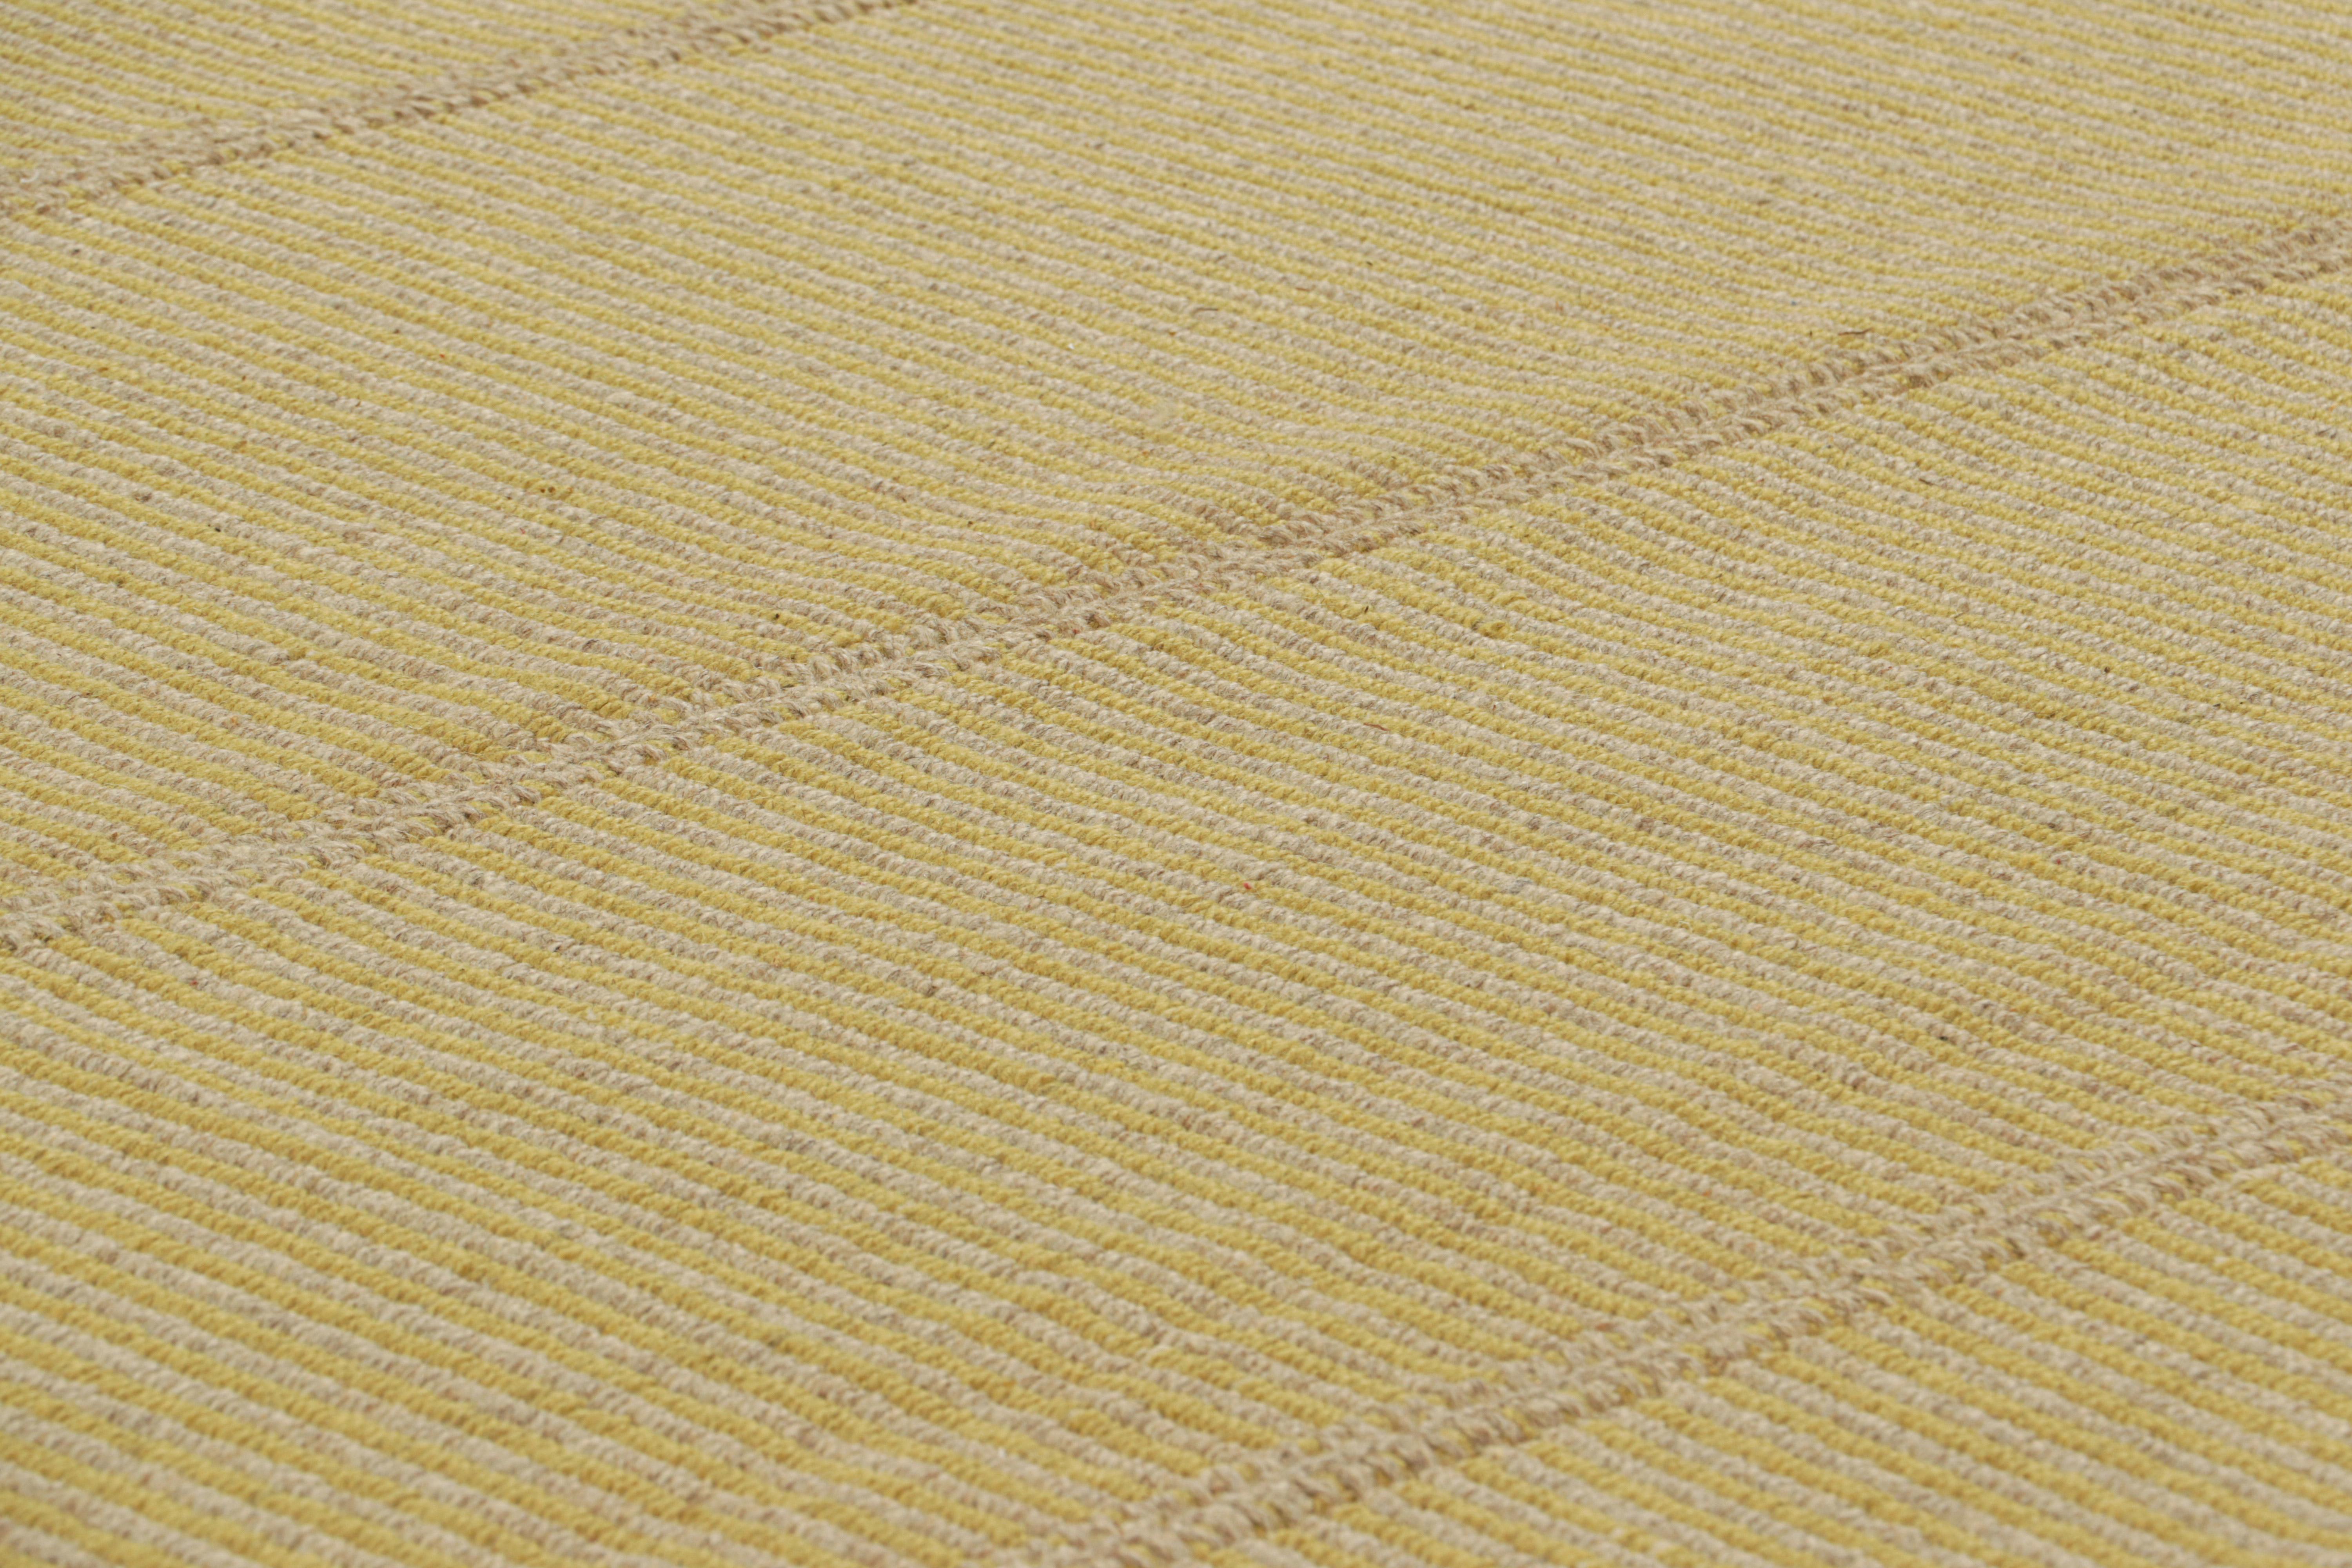 Handwoven in wool, a 9x12 Kilim design from an inventive new contemporary flat weave collection by Rug & Kilim.

On the Design: 

Fondly dubbed, “Rez Kilims”, this modern take on classic panel-weaving enjoys a fabulous, unique play of beige and gold